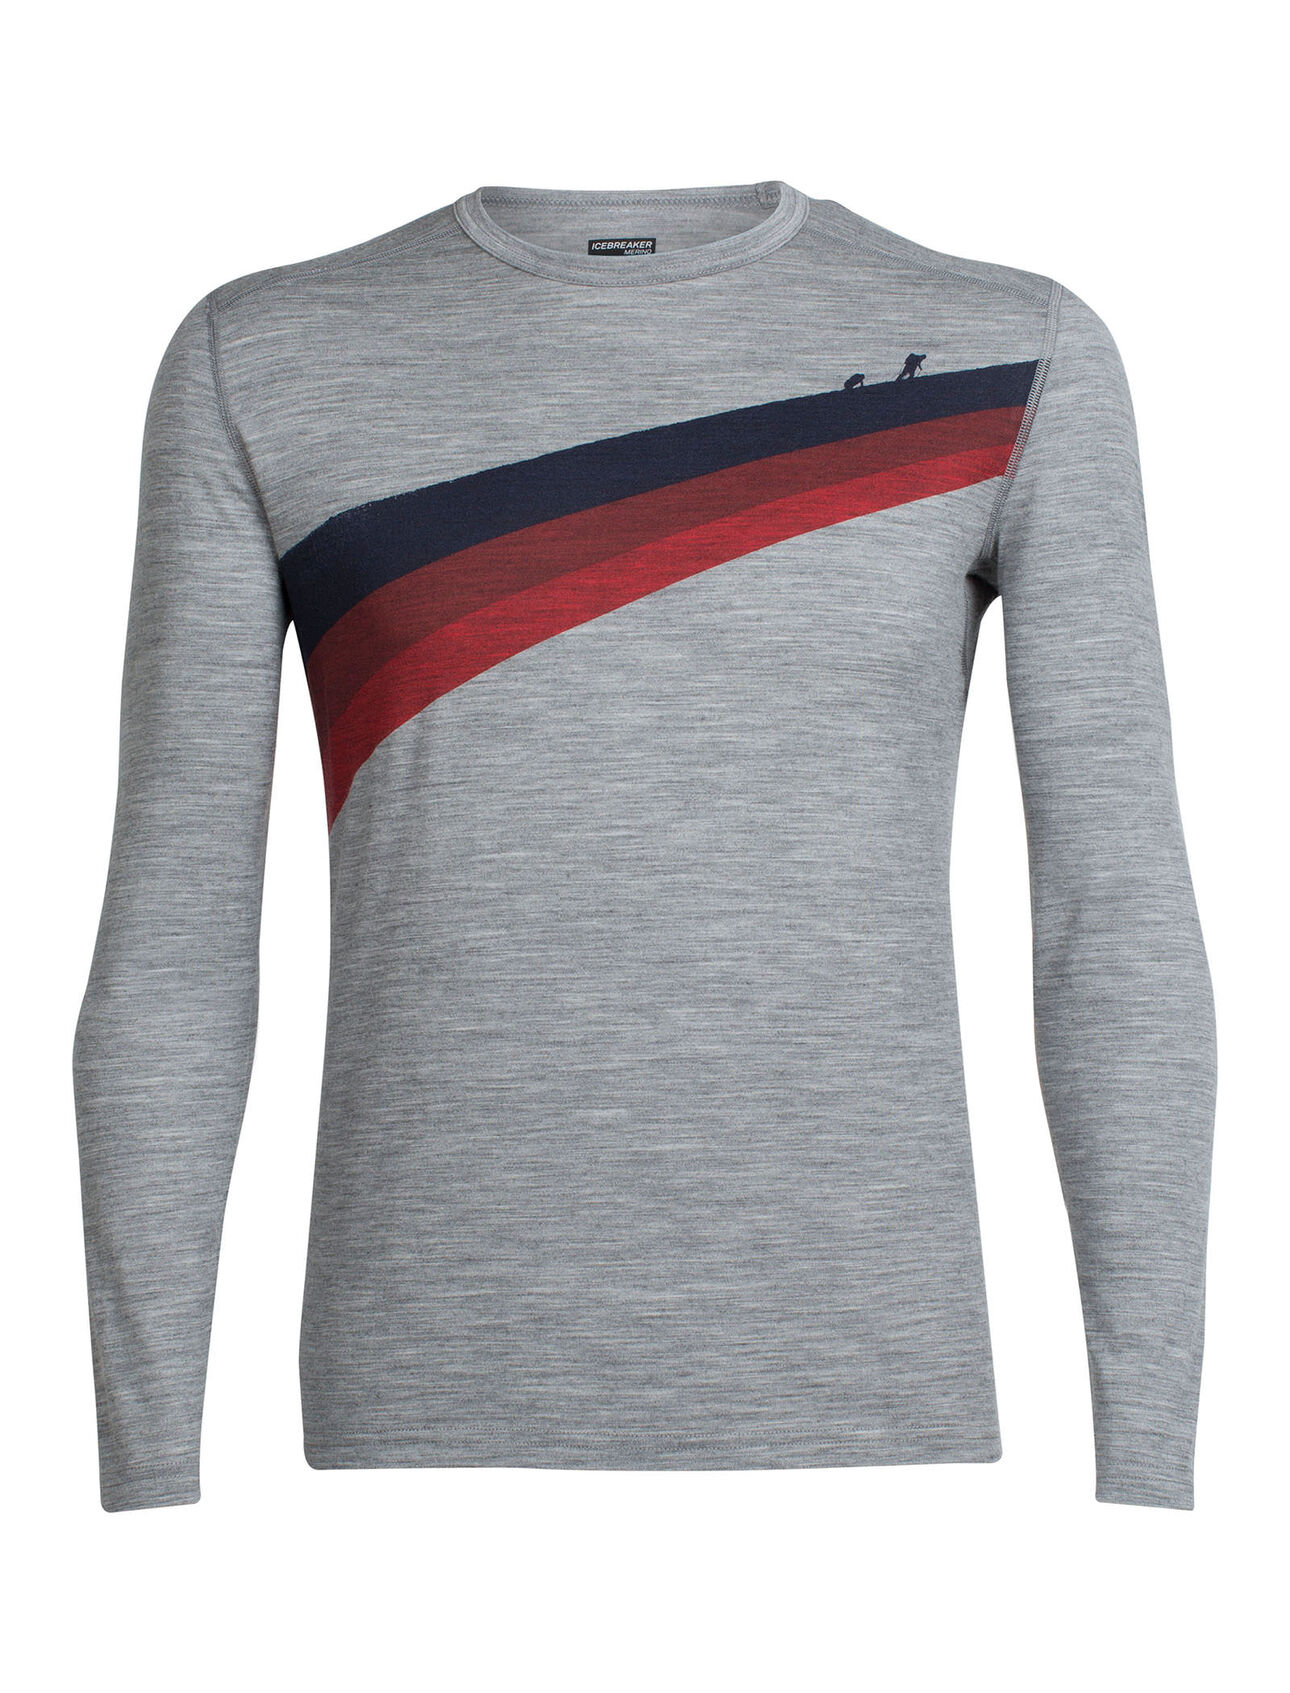 Oasis Long Sleeve Crewe Ascent Stripe